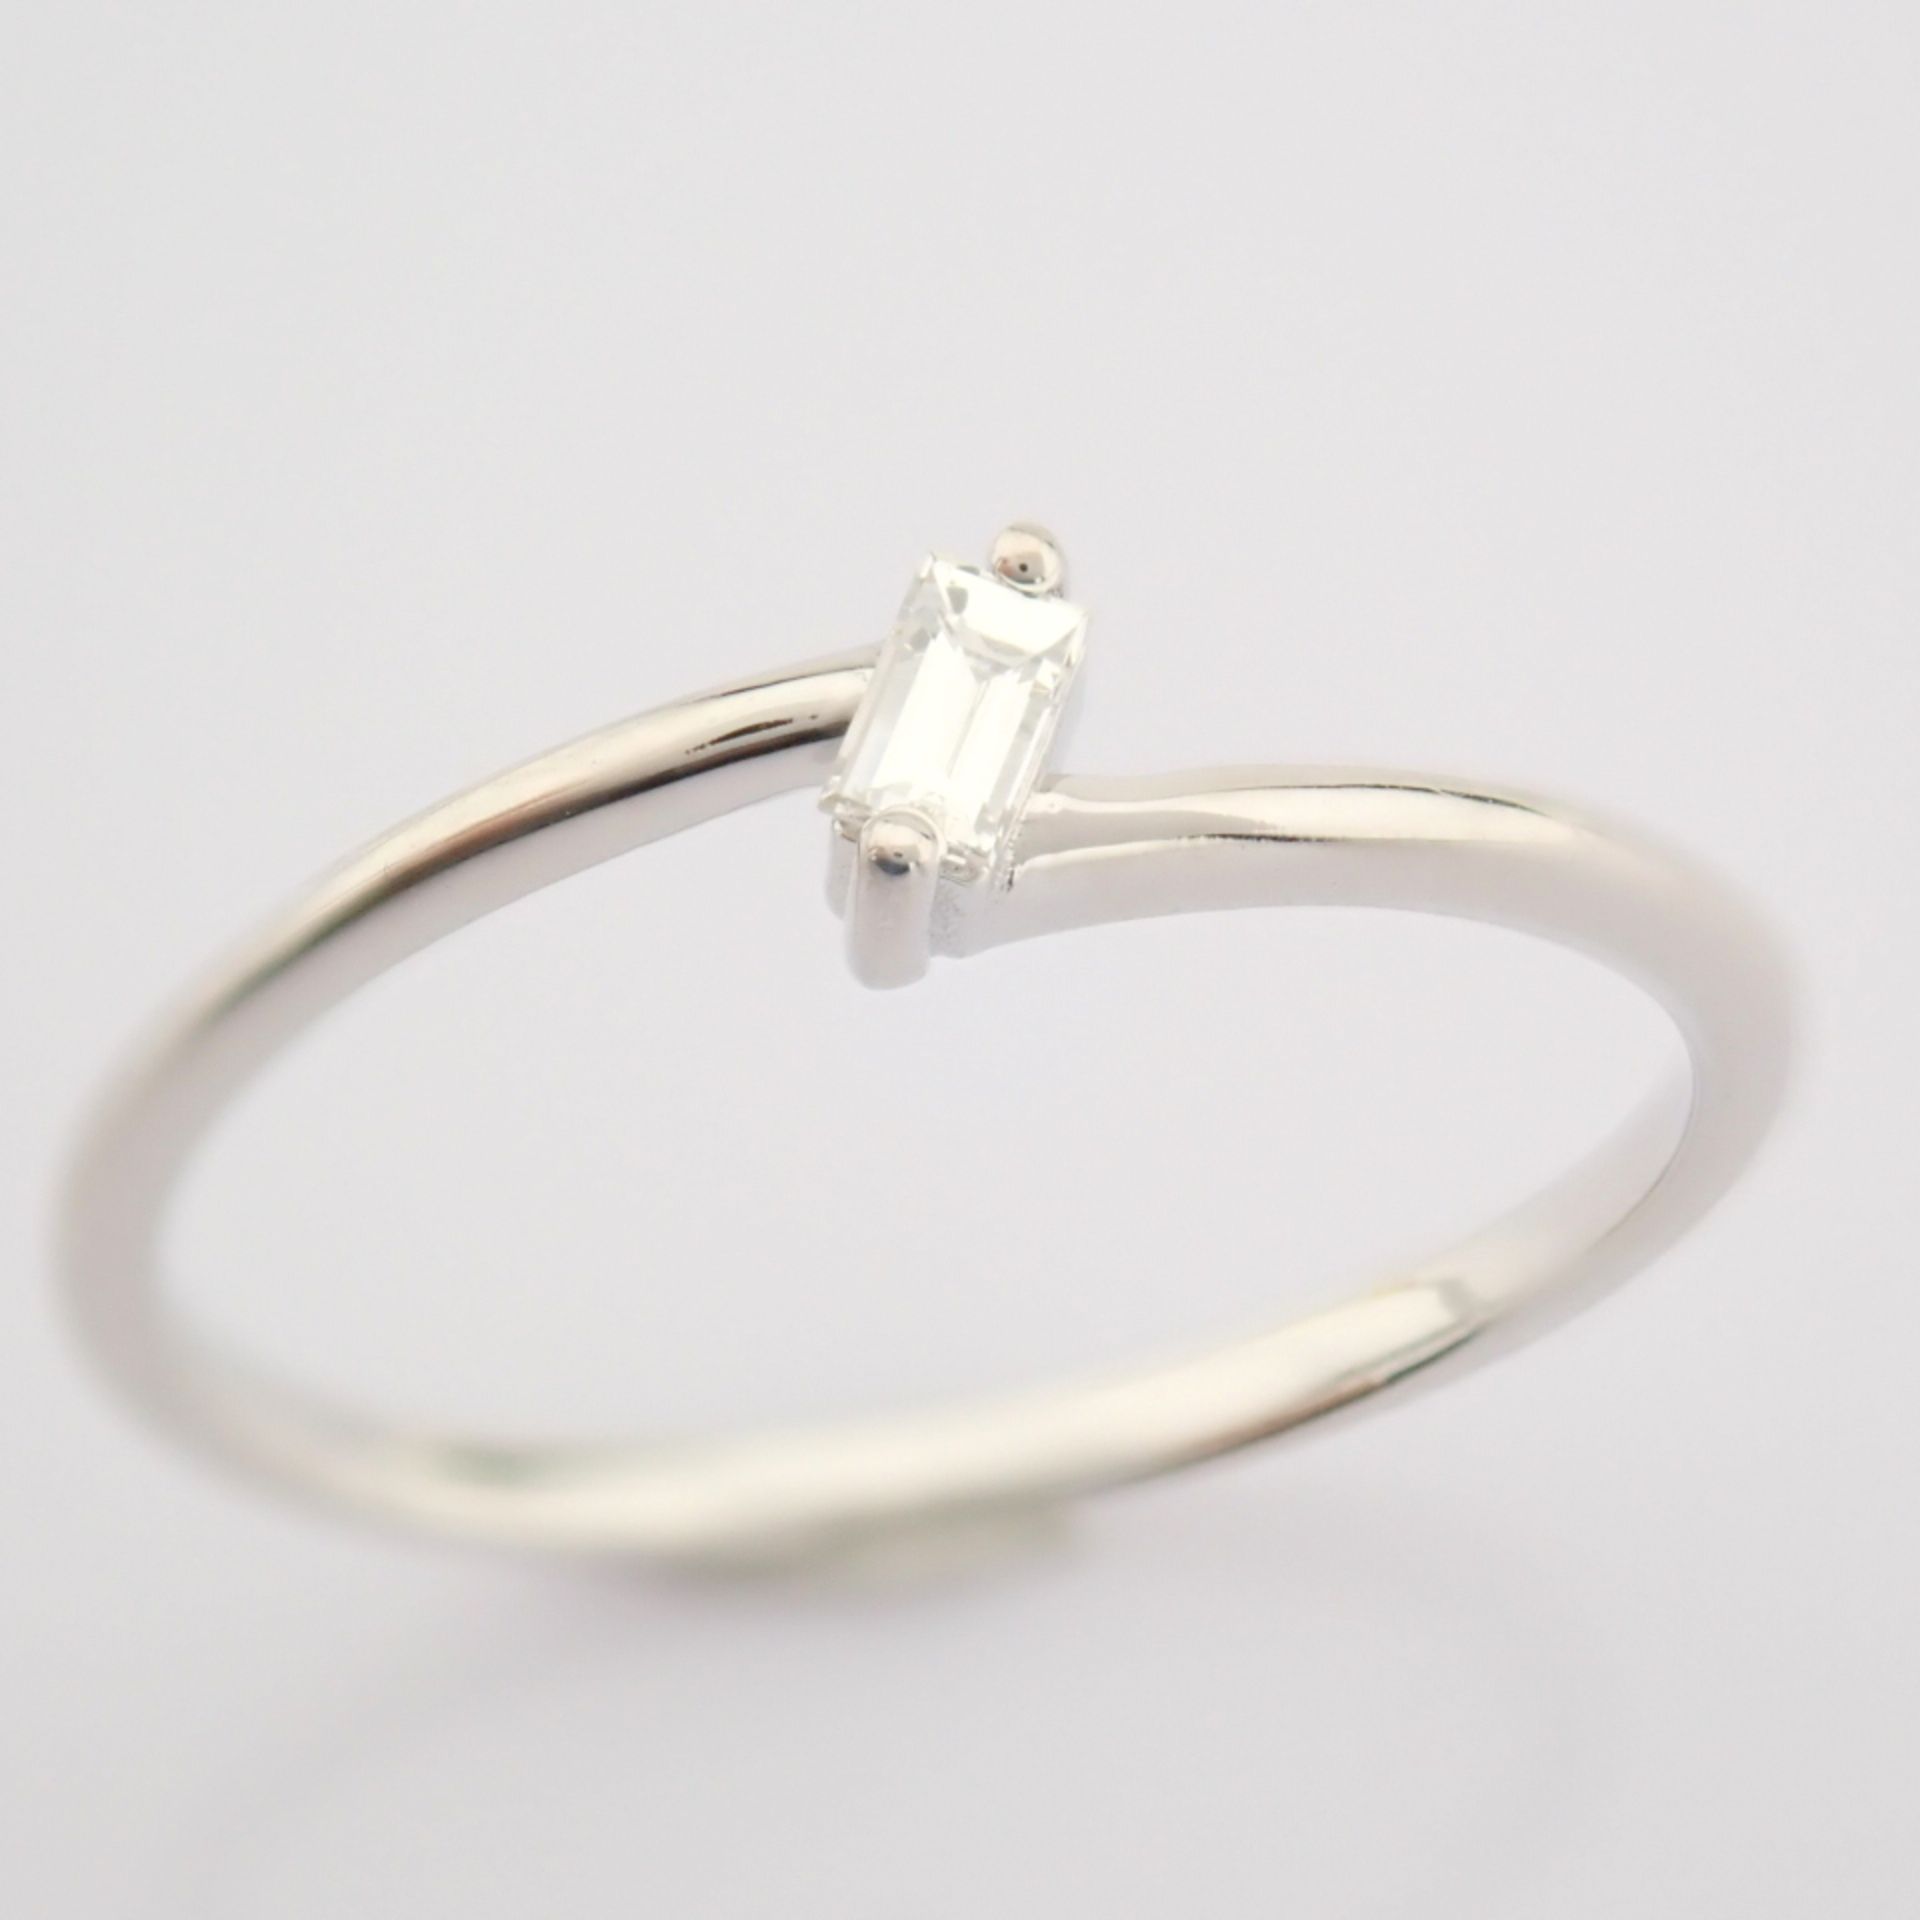 Certificated 14K White Gold Diamond Ring - Image 3 of 11